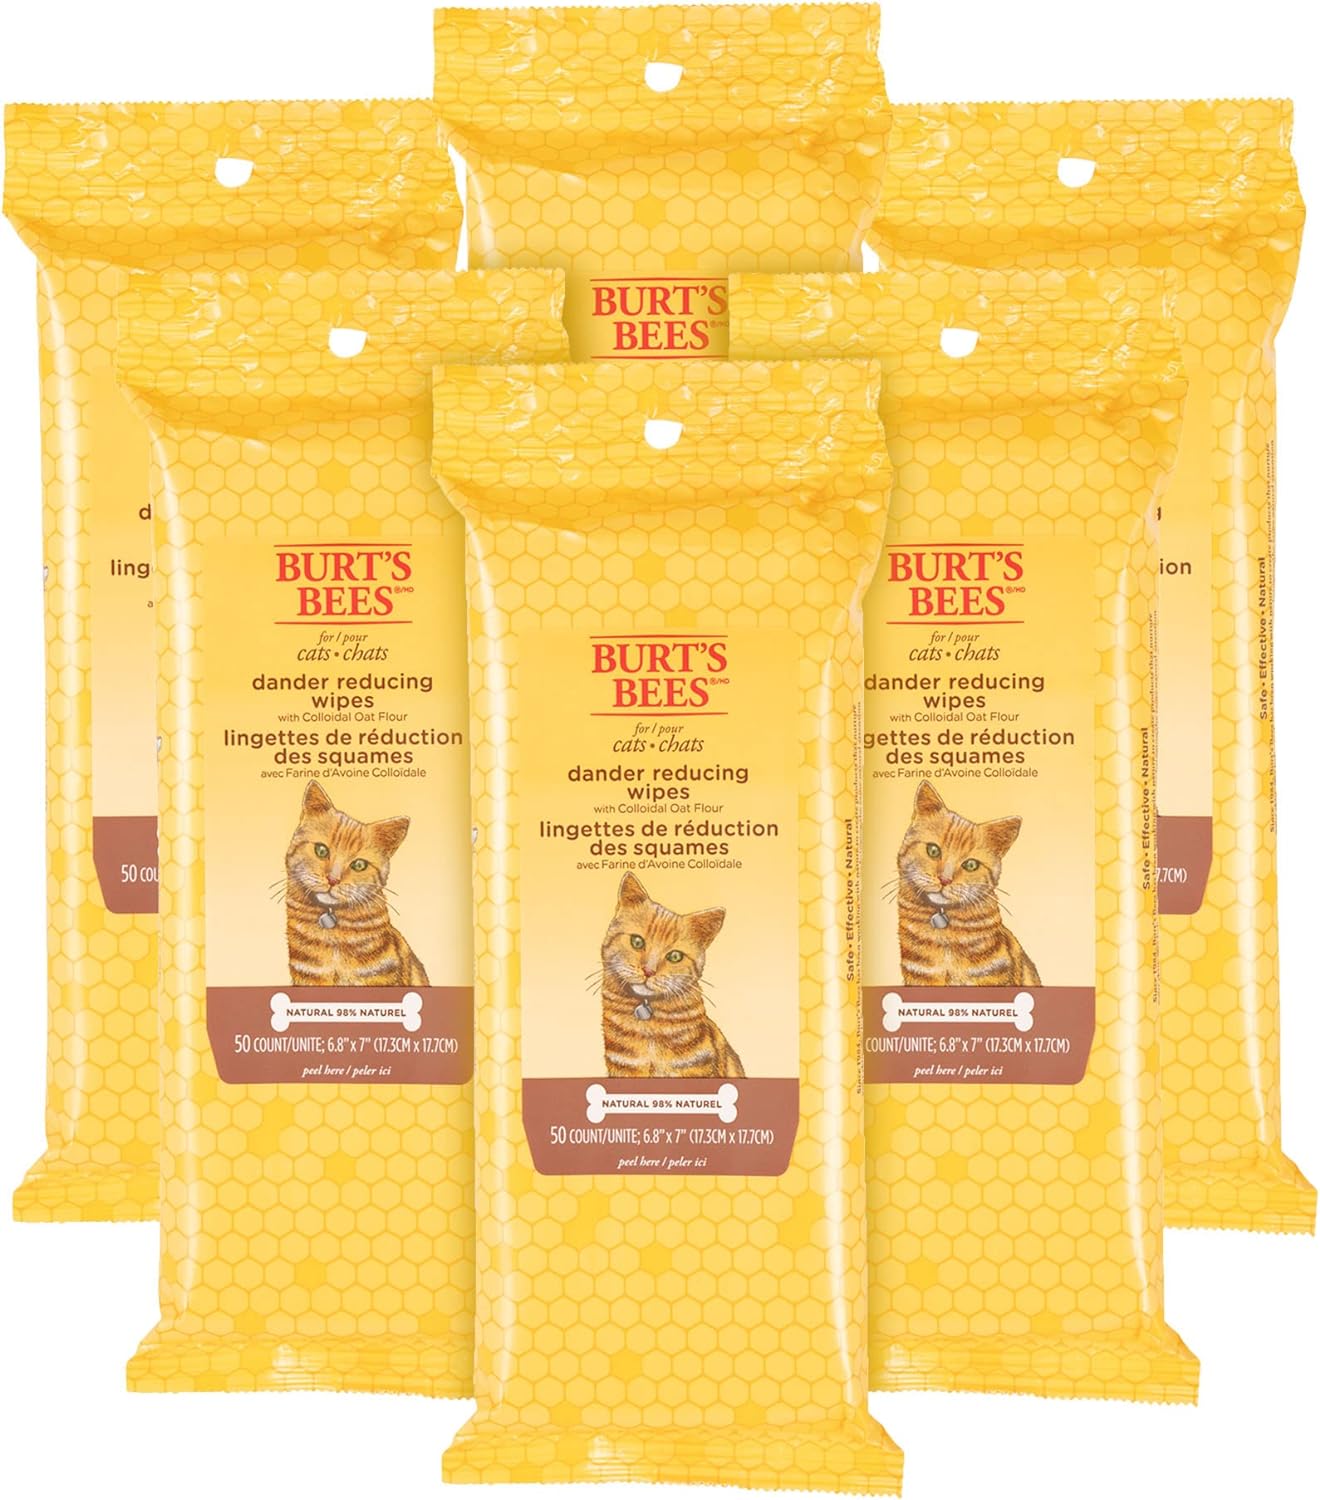 Burt's Bees for Pets Cat Natural Dander Reducing Wipes | Kitten and Cat Wipes for Grooming | Cruelty Free, Sulfate & Paraben Free, pH Balanced for Cats - Made in USA, 50 Count - 6 Pack